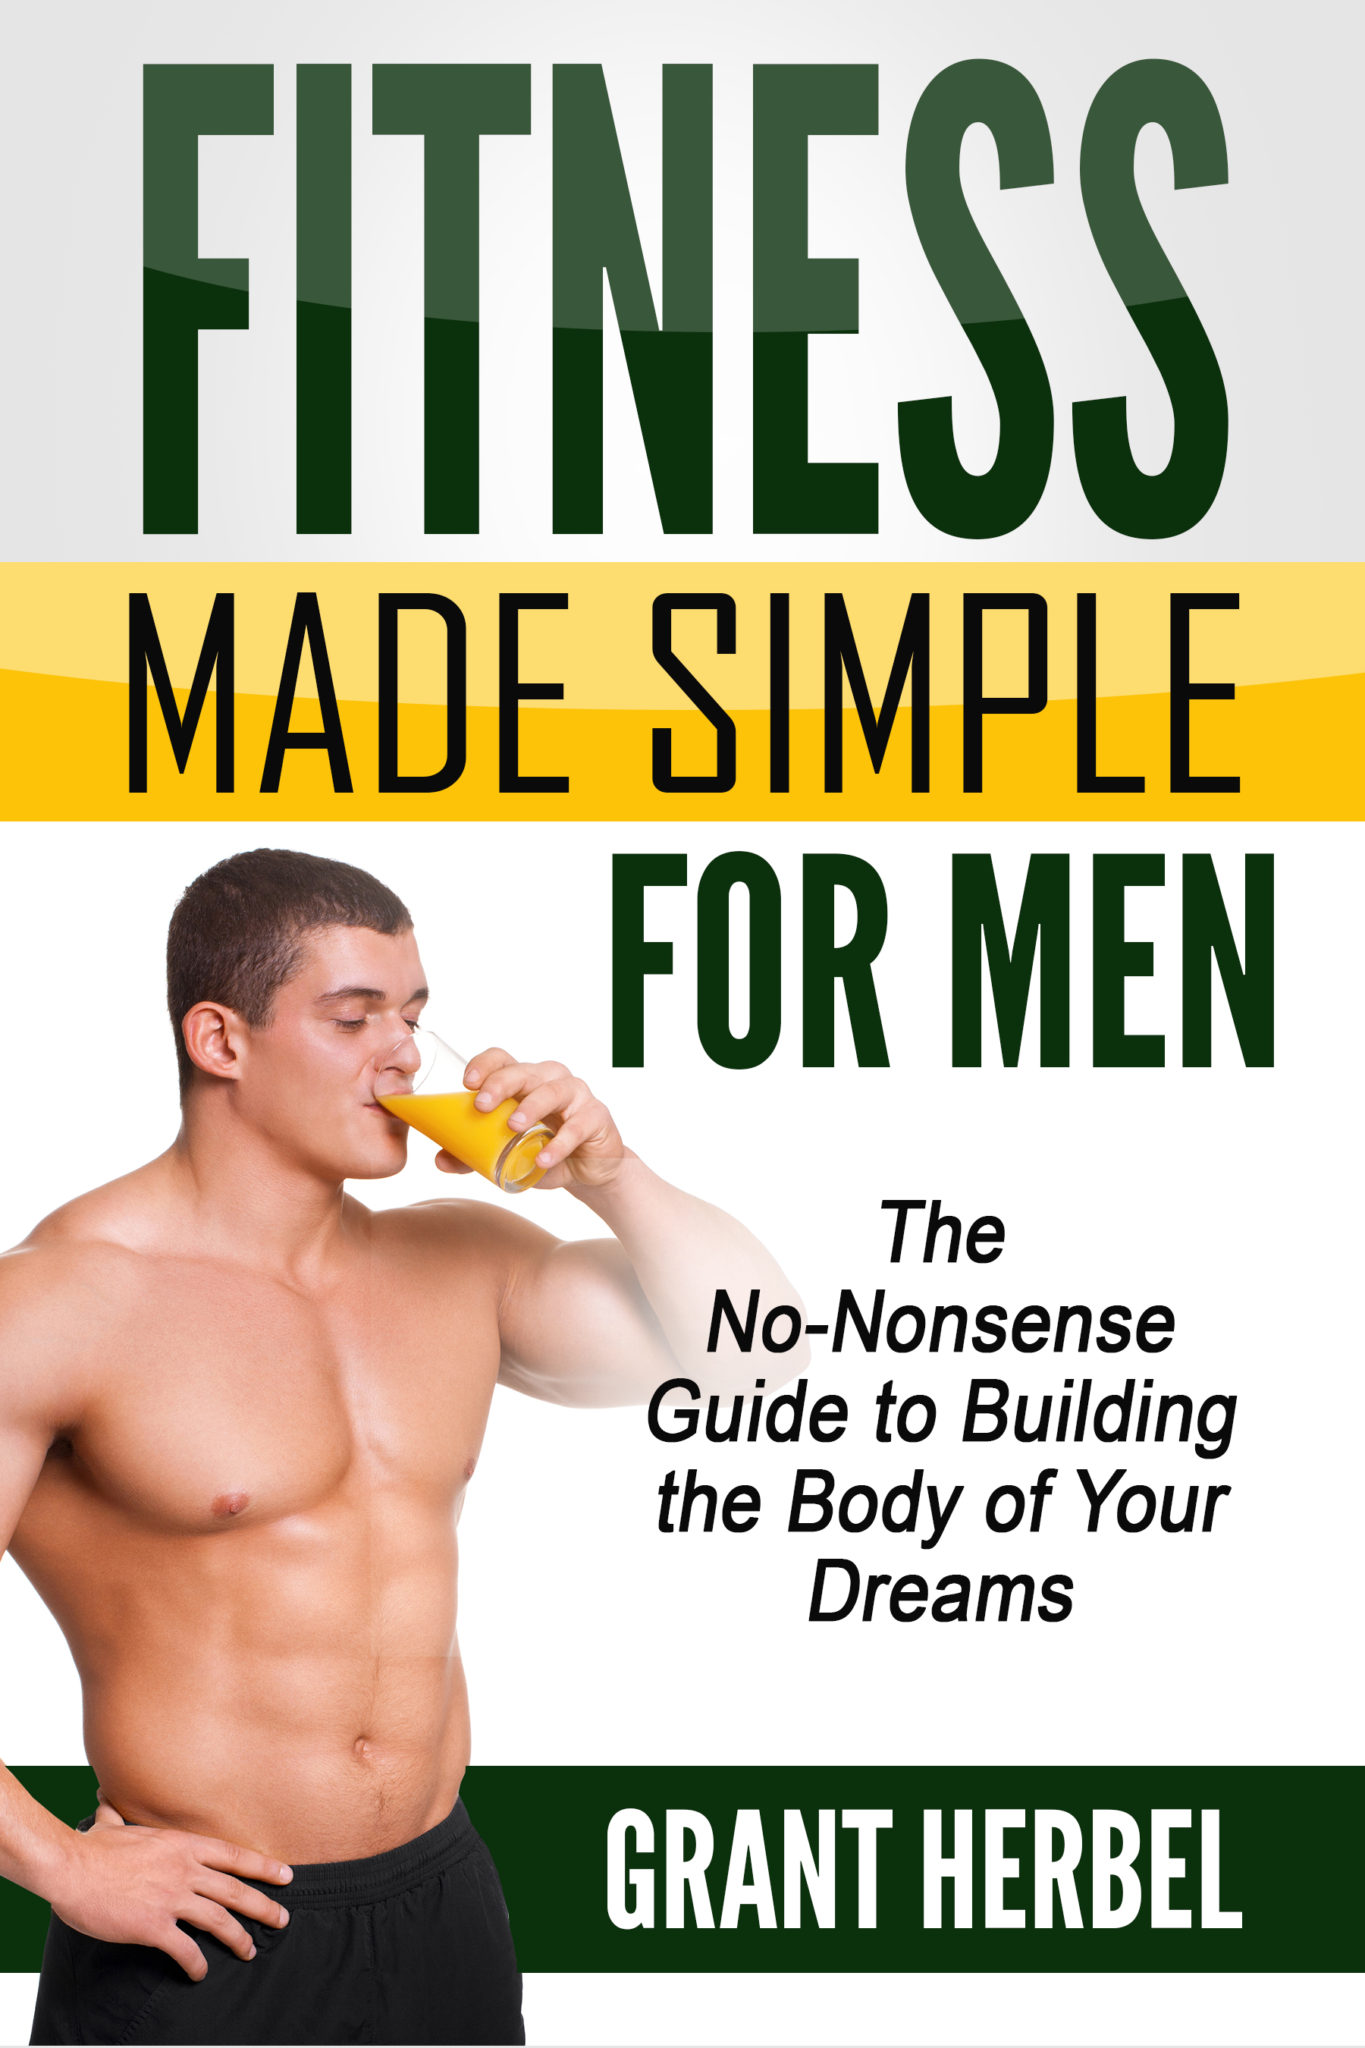 FREE: Fitness Made Simple For Men: The No-nonsense Guide to Building the Body of Your Dreams by Grant Herbel